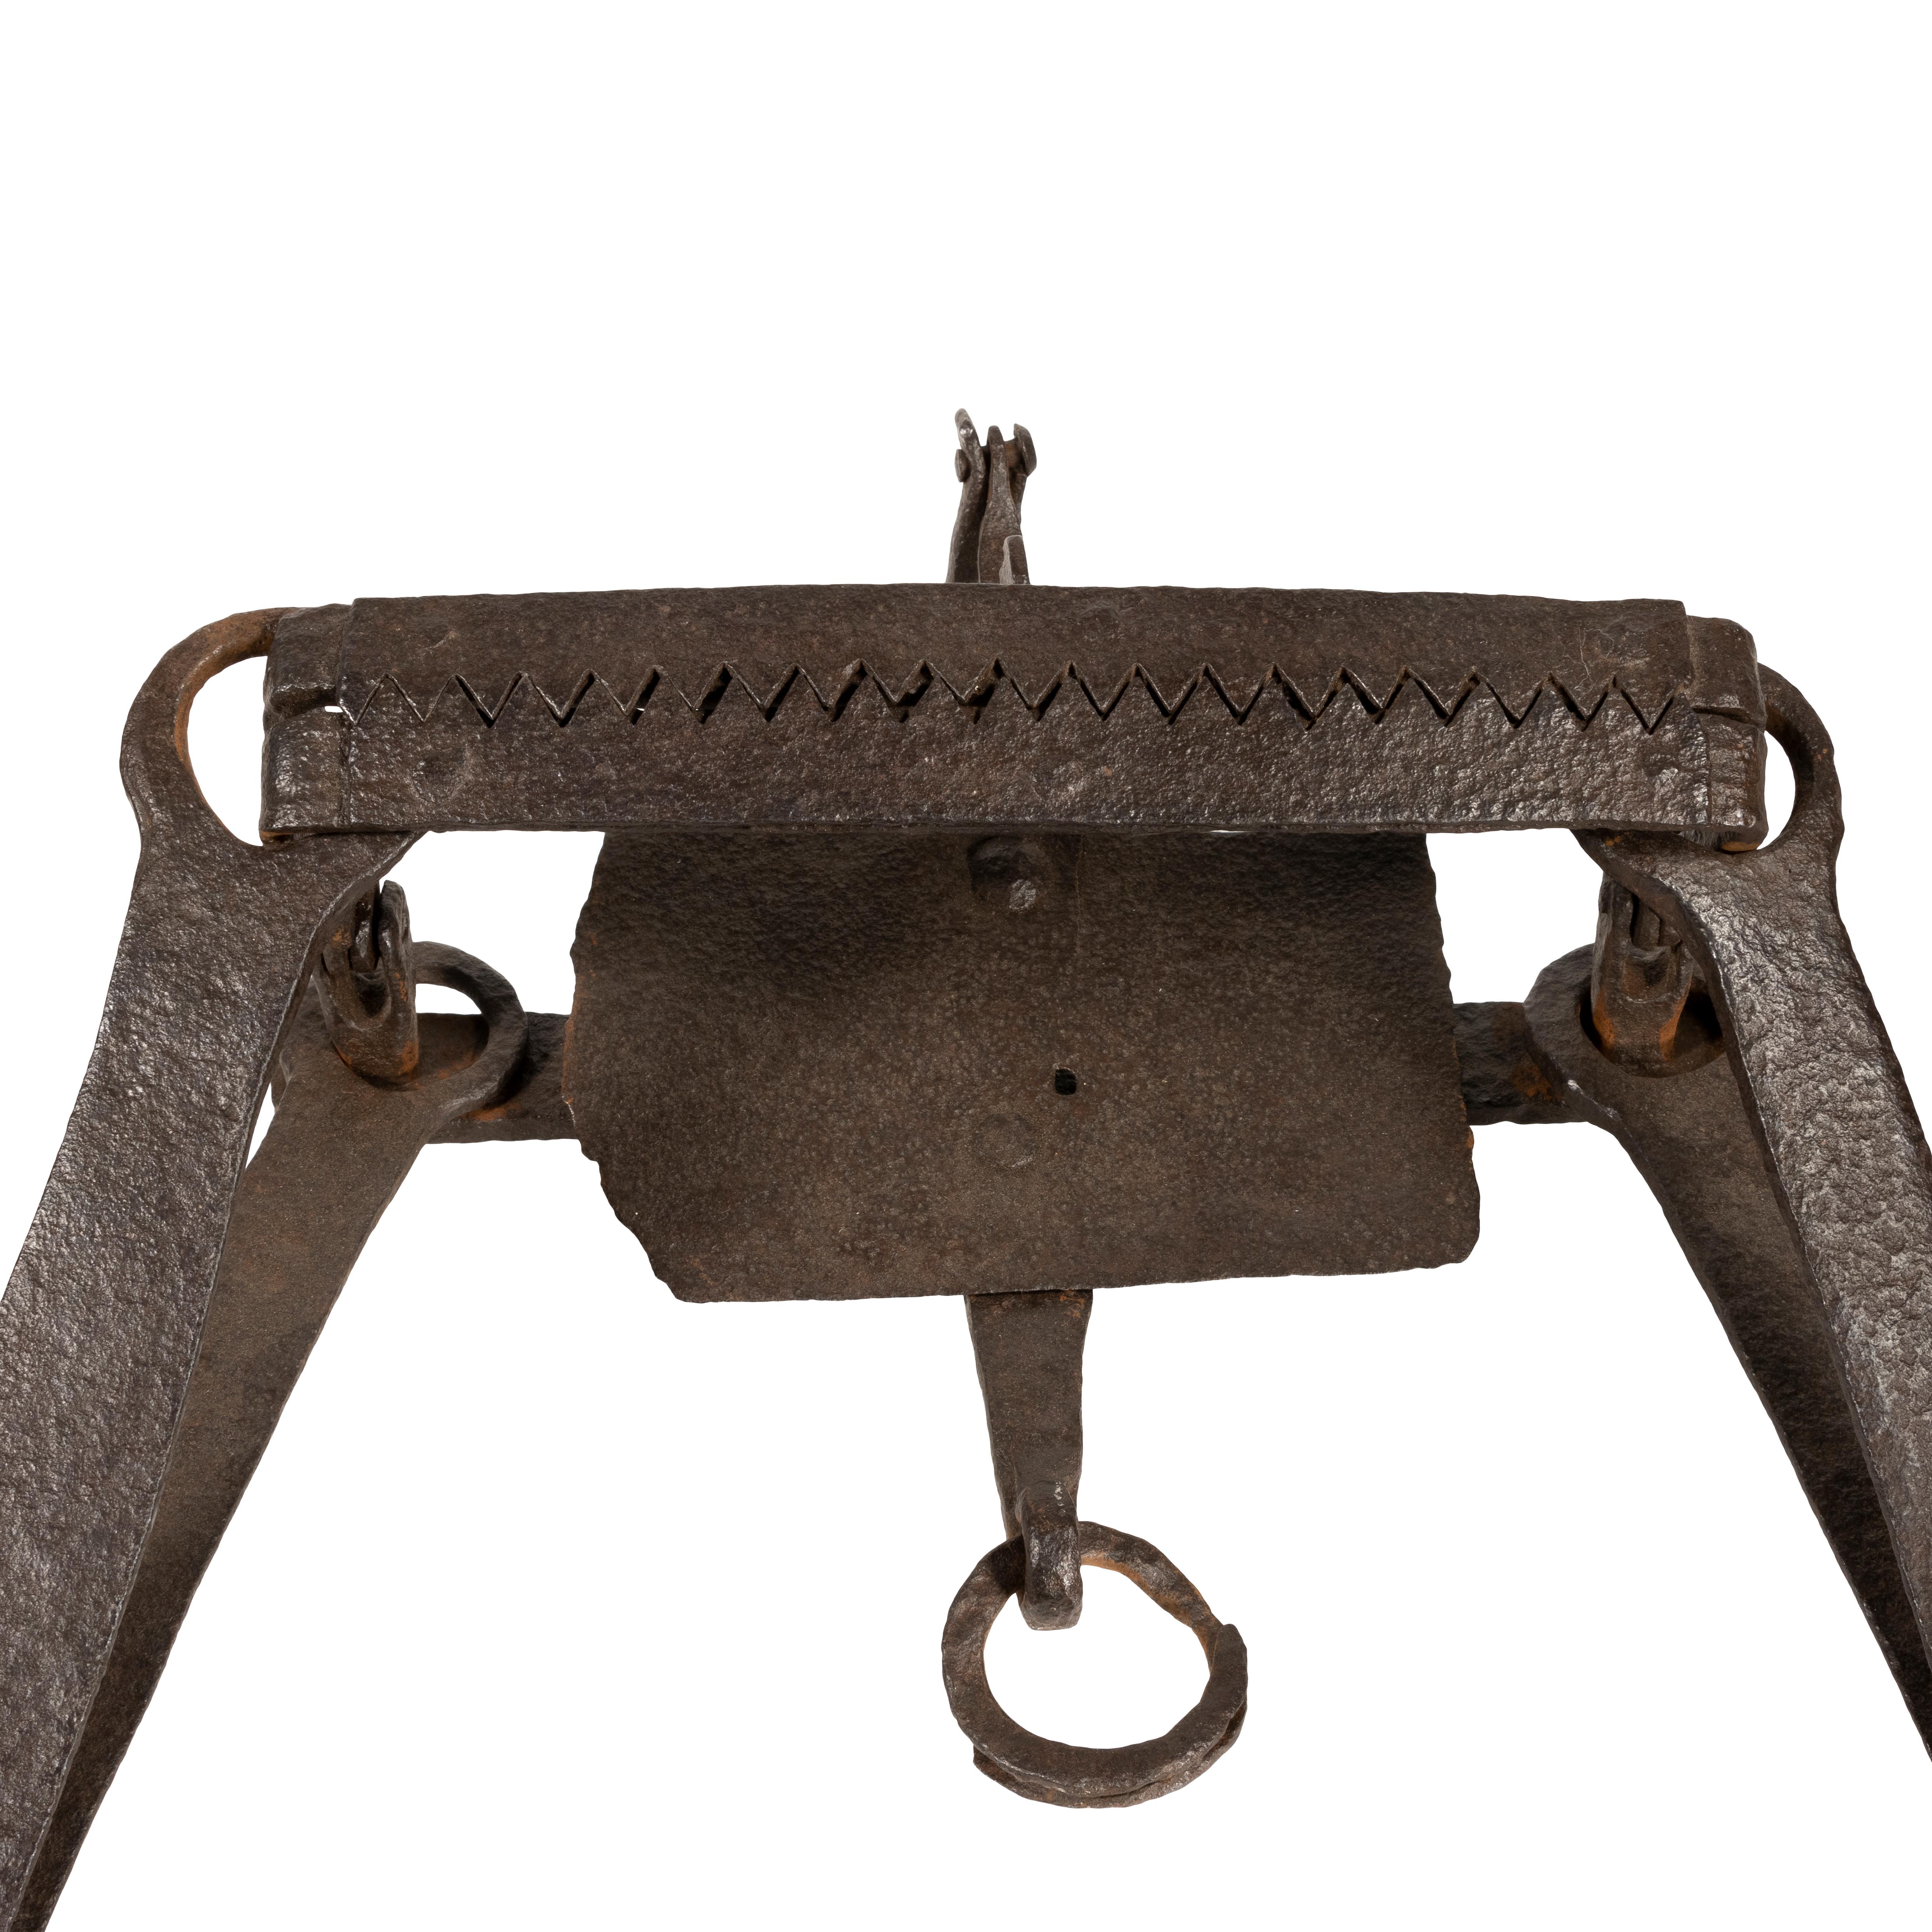 Hand forged bear trap with extra-large pan, serrated jaws attached by rivets. Unique chain attachment opposite the pan toggle. From the patina and wear this one appears to have been 